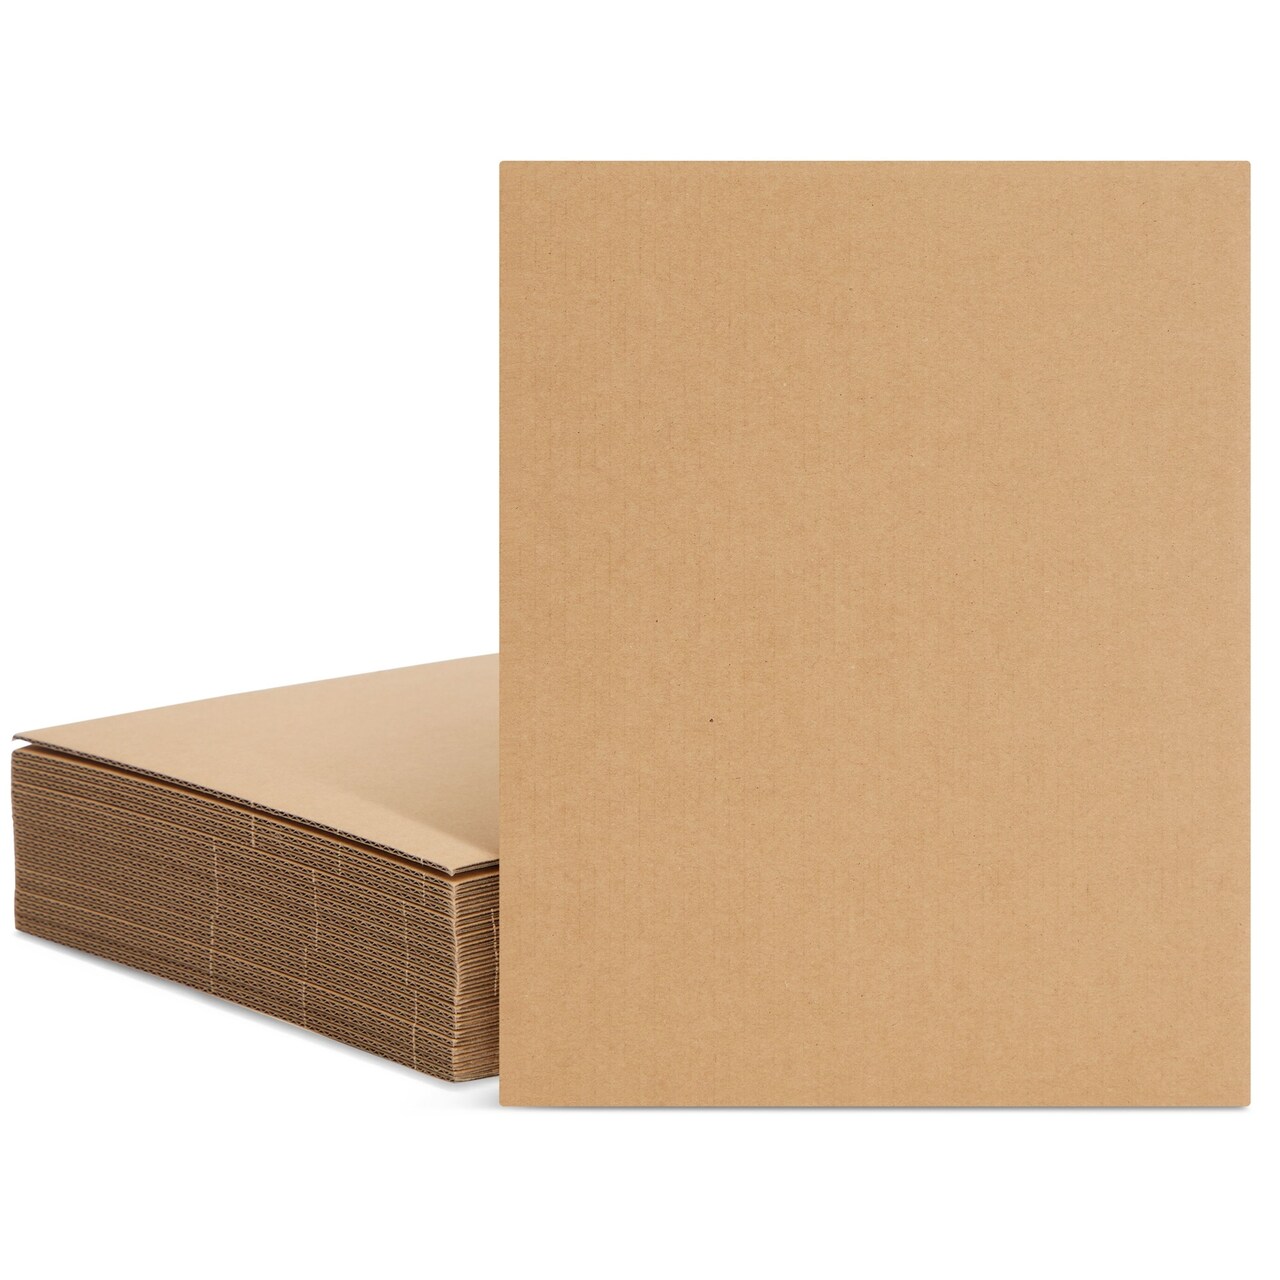 25 Pack Corrugated Cardboard Sheets, 8x10 Flat Card Boards Inserts for  Crafts, Packing, Shipping, Moving, Mailing, DIY Art Projects, Classroom